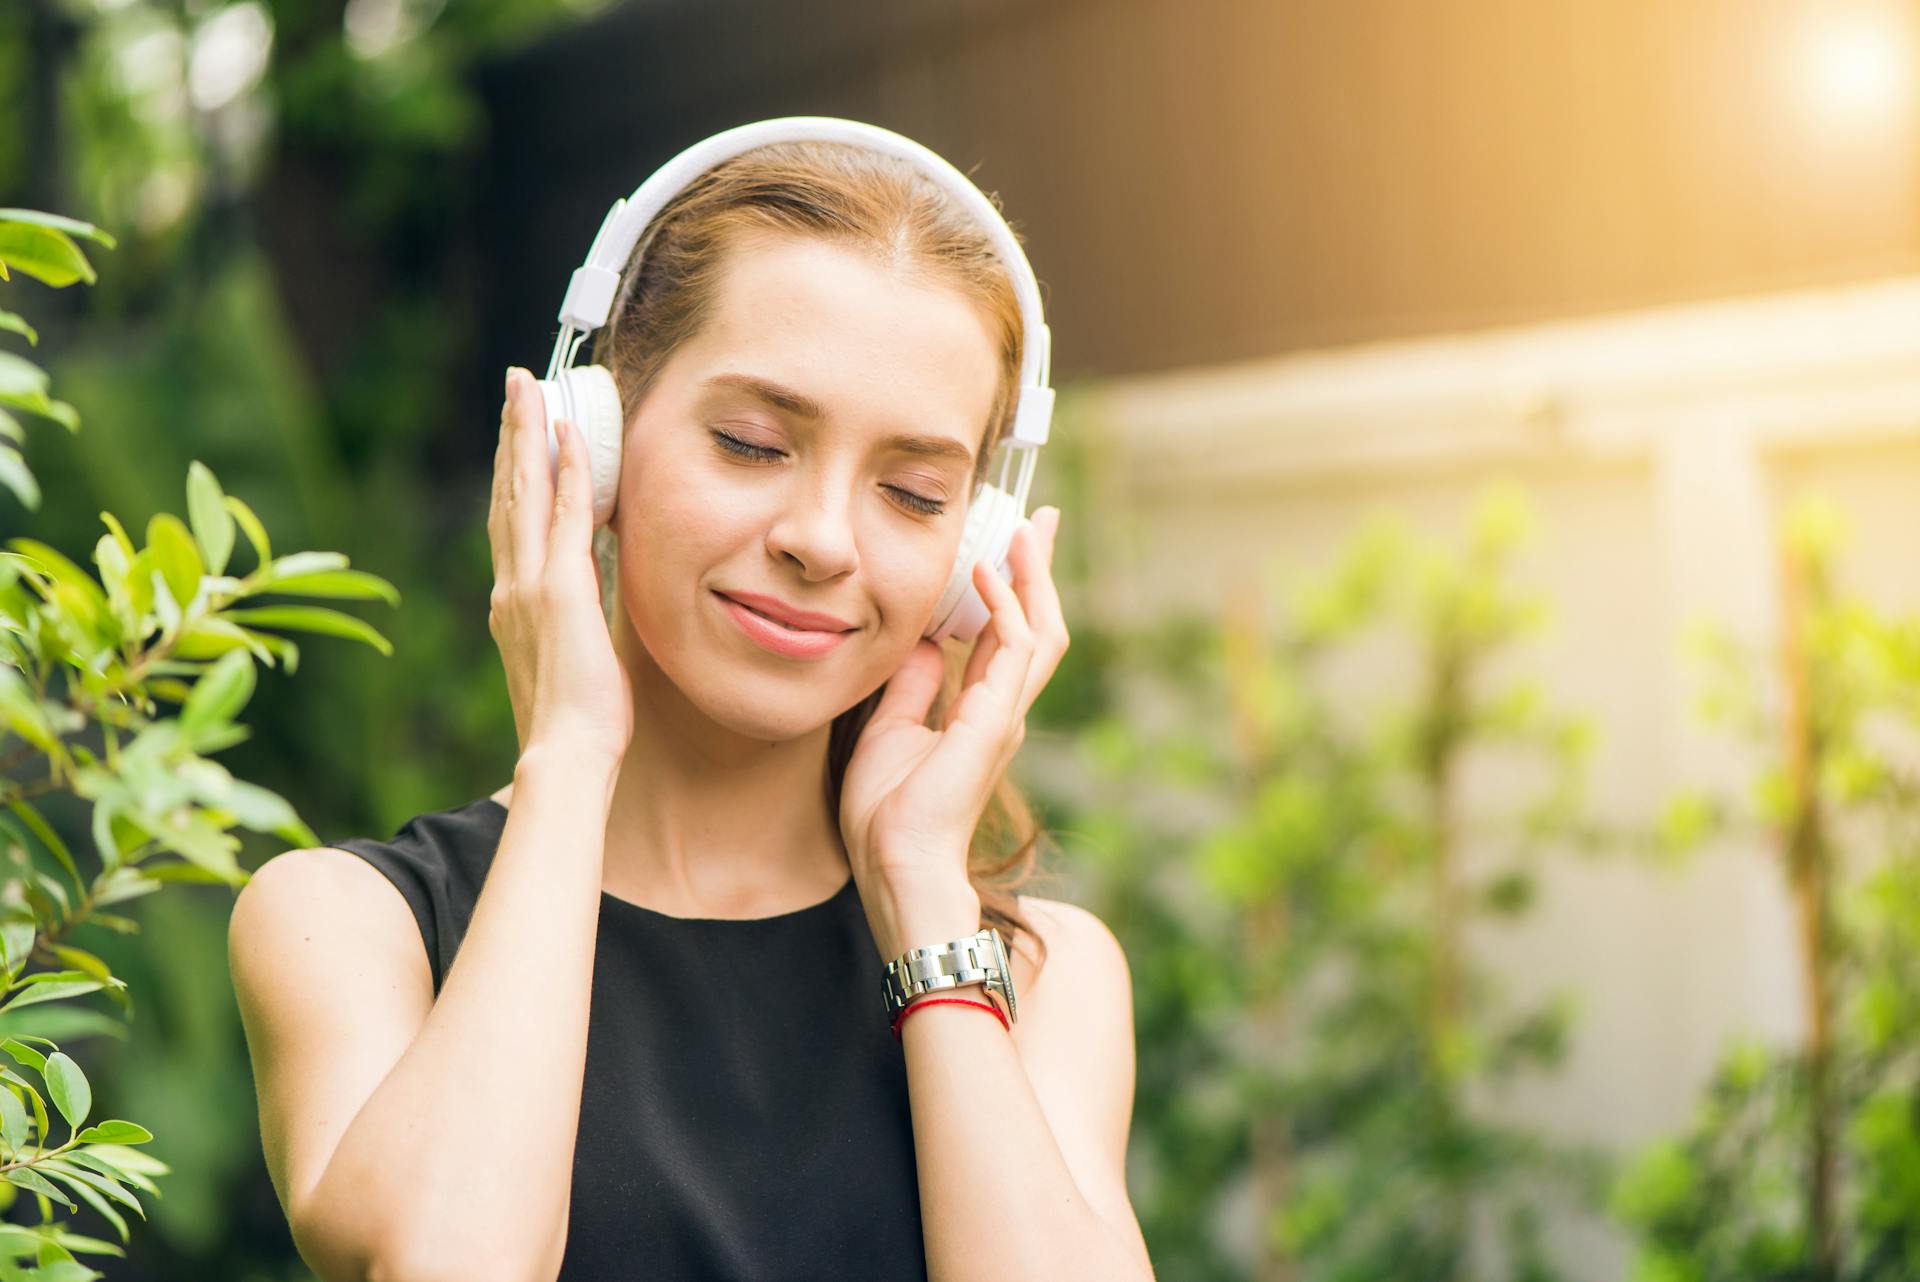 A relaxed and happy person listening to music